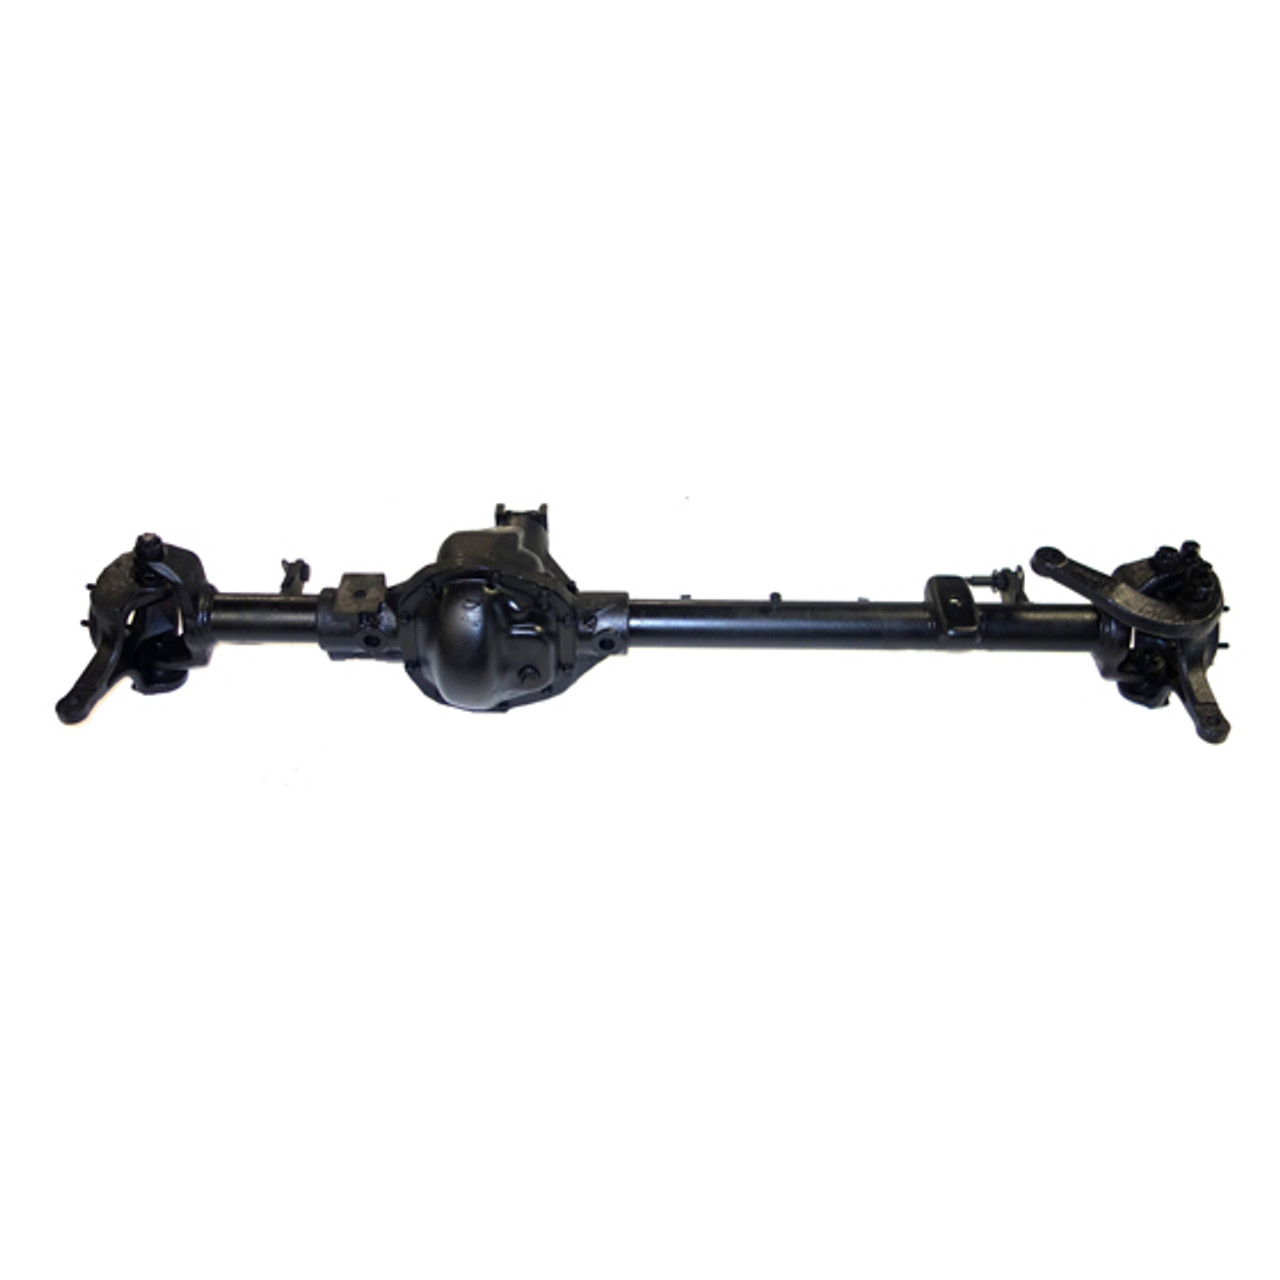 Reman Complete Axle Assembly for Dana 60 00-02 Dodge Ram 2500 & 3500 4.11 Ratio with 4 Wheel ABS, Vacuum Disco